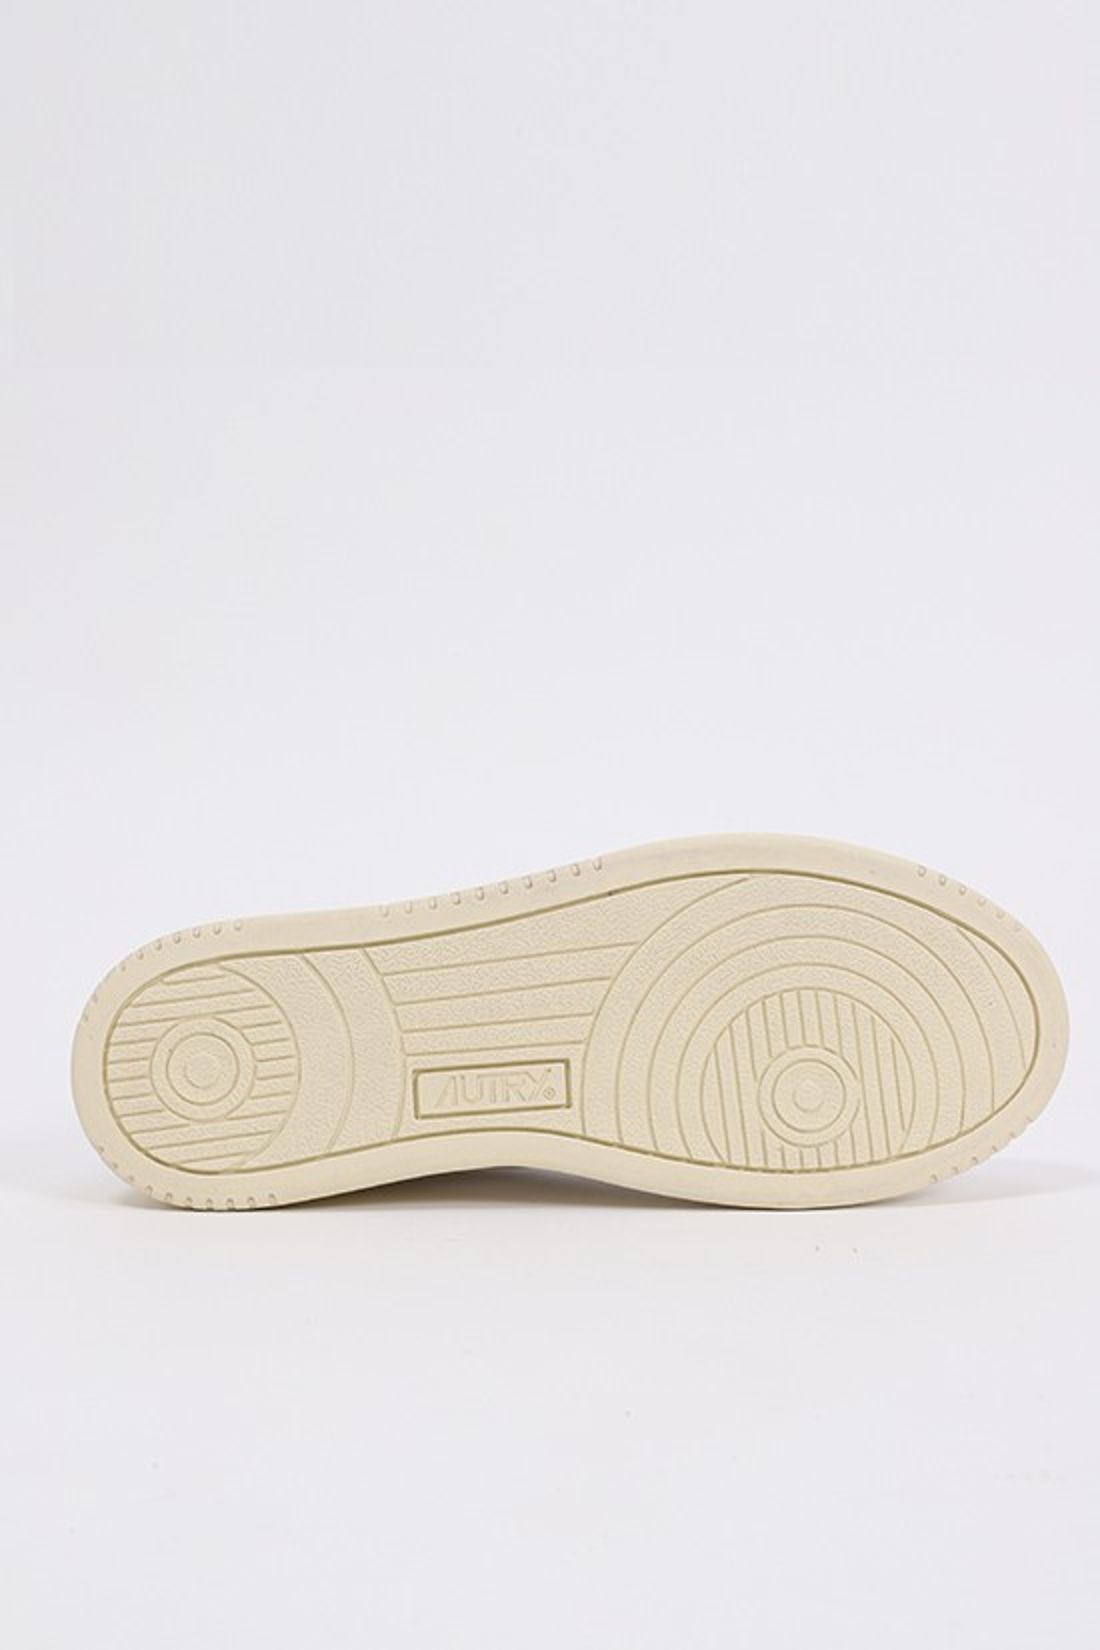 AUTRY / Autry ce01 mid man open All white